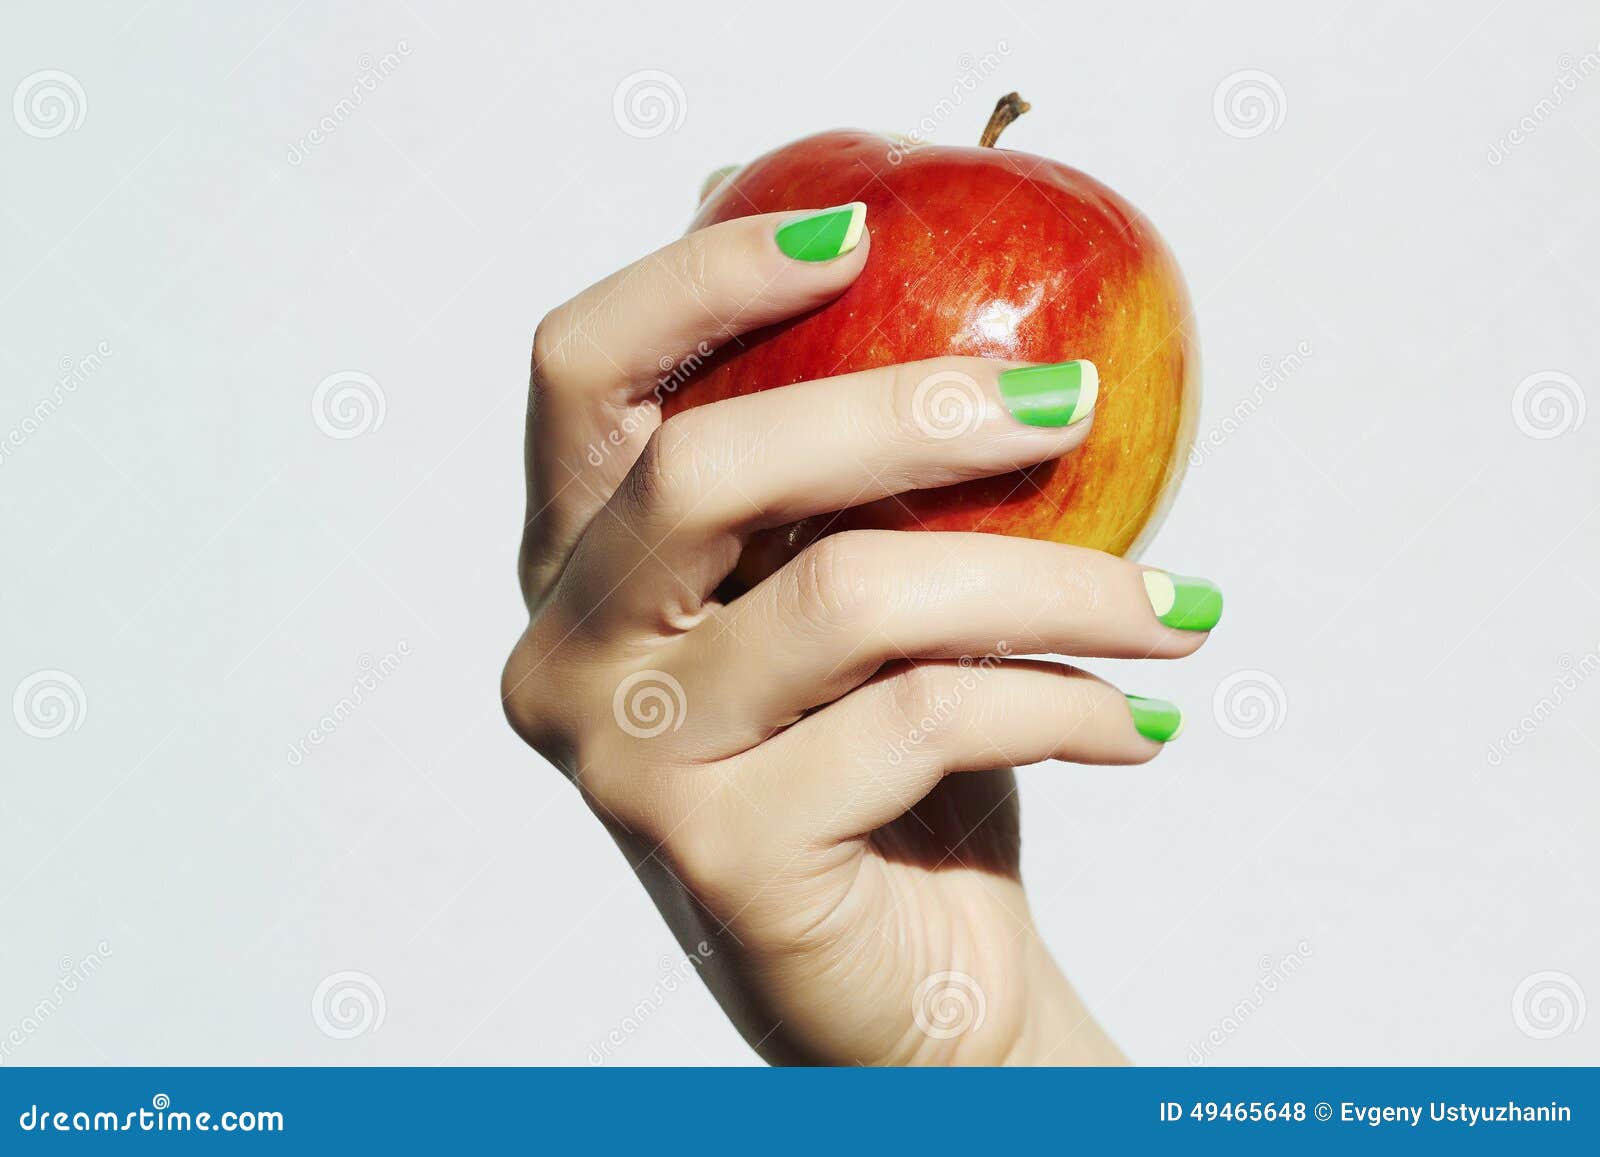 red apple in hand with manicure. female hands. beauty salon woman shellac polish